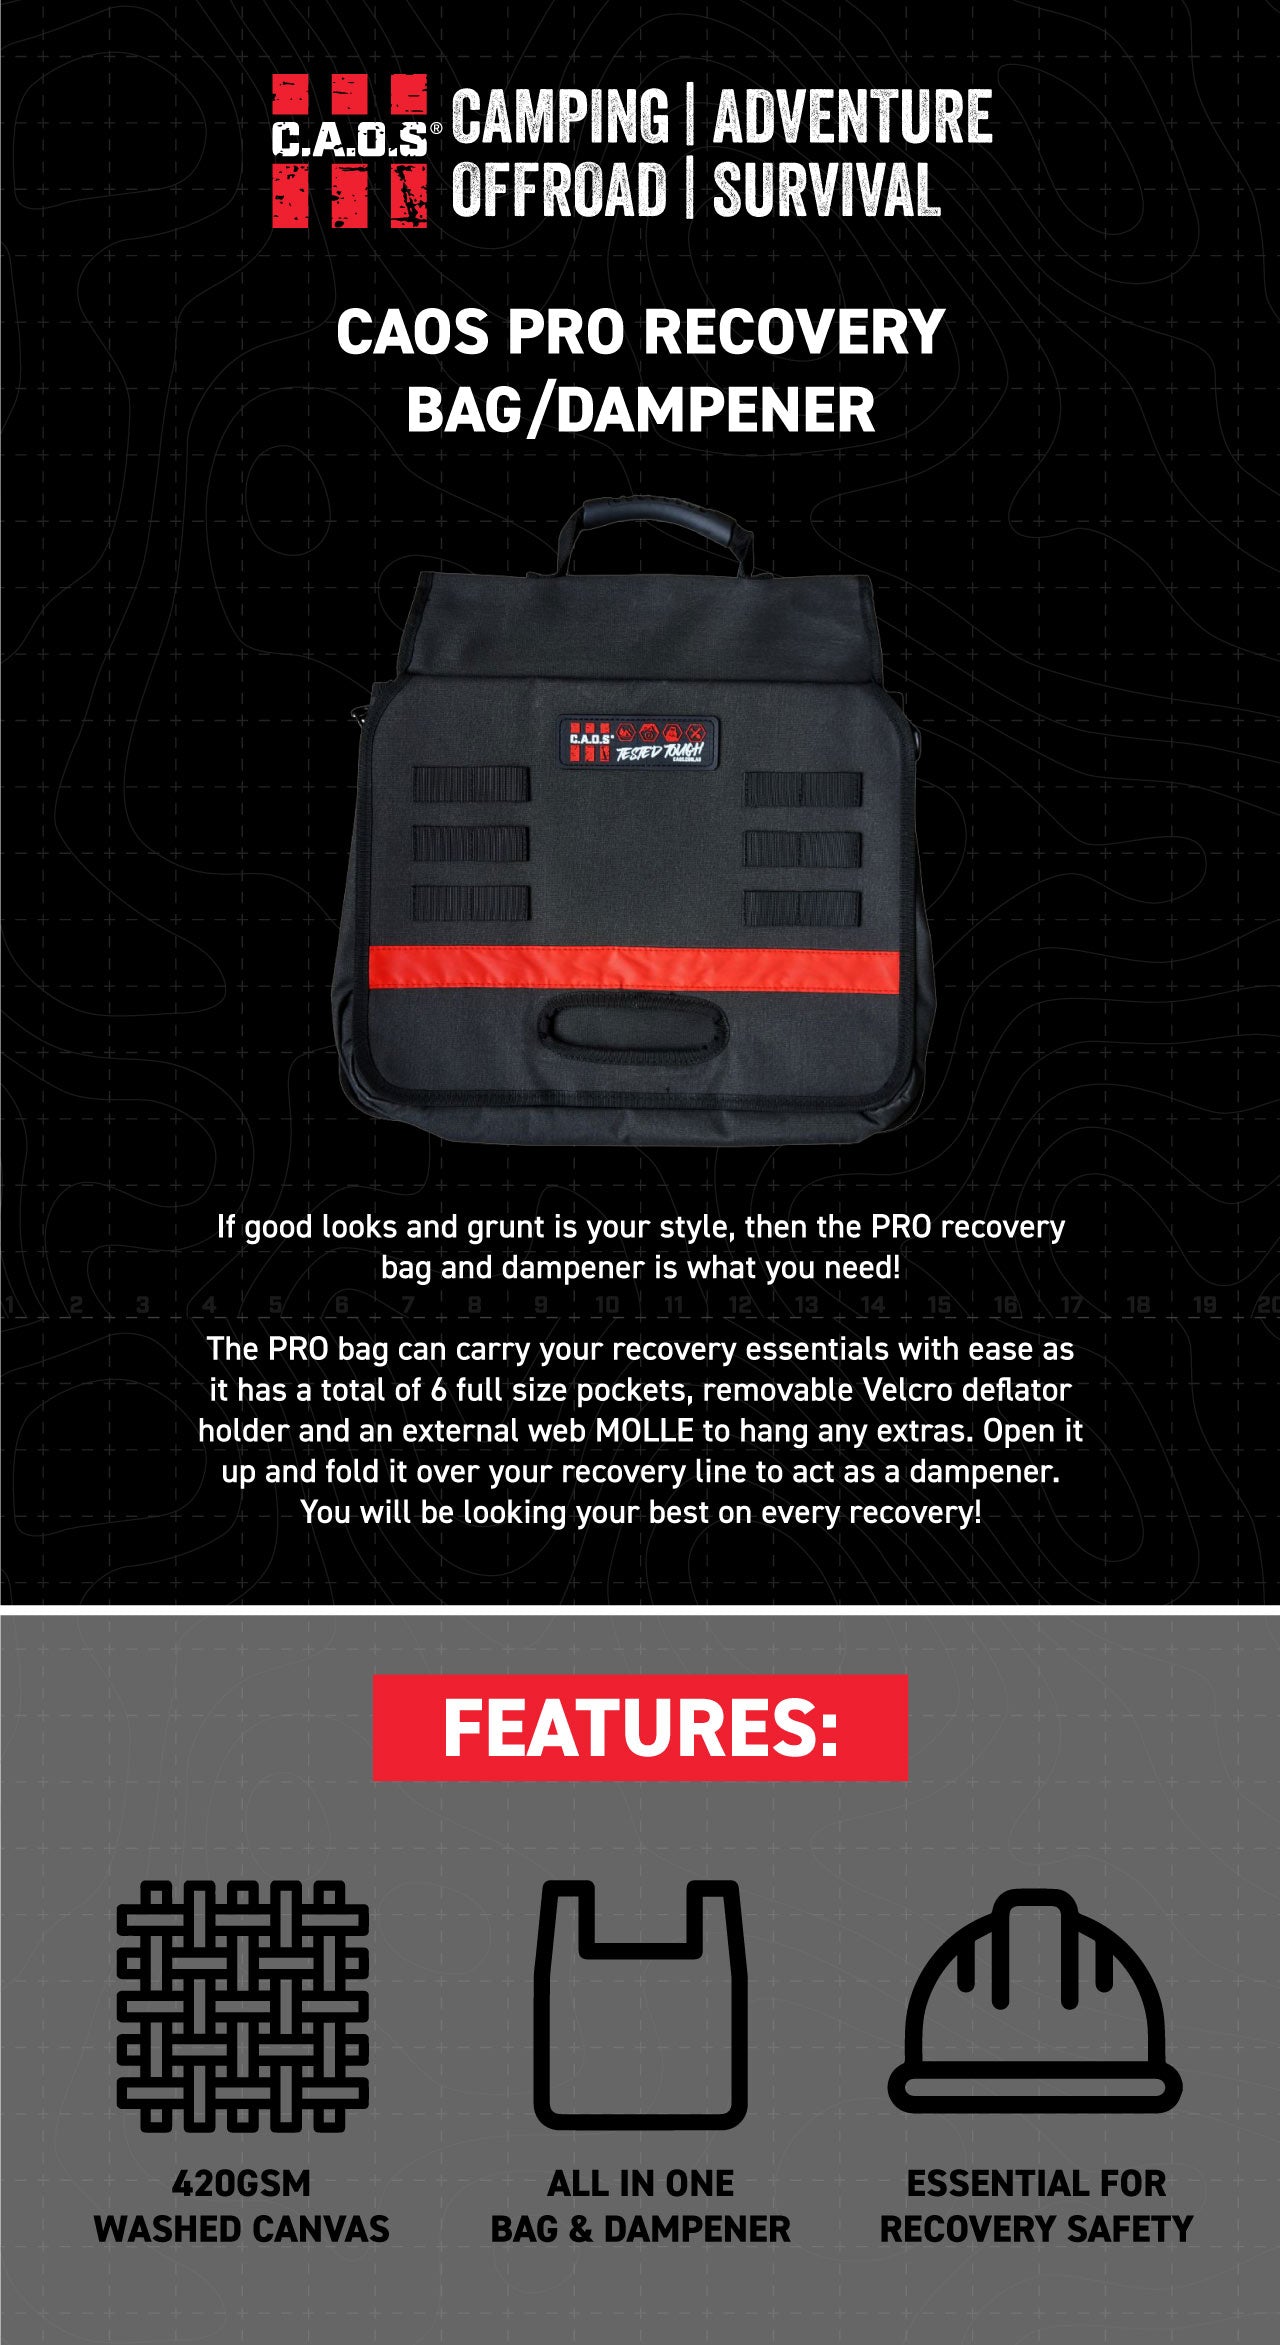 If good looks and grunt is your style, then the PRO recovery bag and damper is what you need!  The PRO bag can carry your recovery essentials with ease as it has a total of 6 full size pockets, removable Velcro deflator holder and an external web MOLLE to hang any extras. Open it up and fold it over your recovery line to act as a damper. You will be looking your best on every recovery!